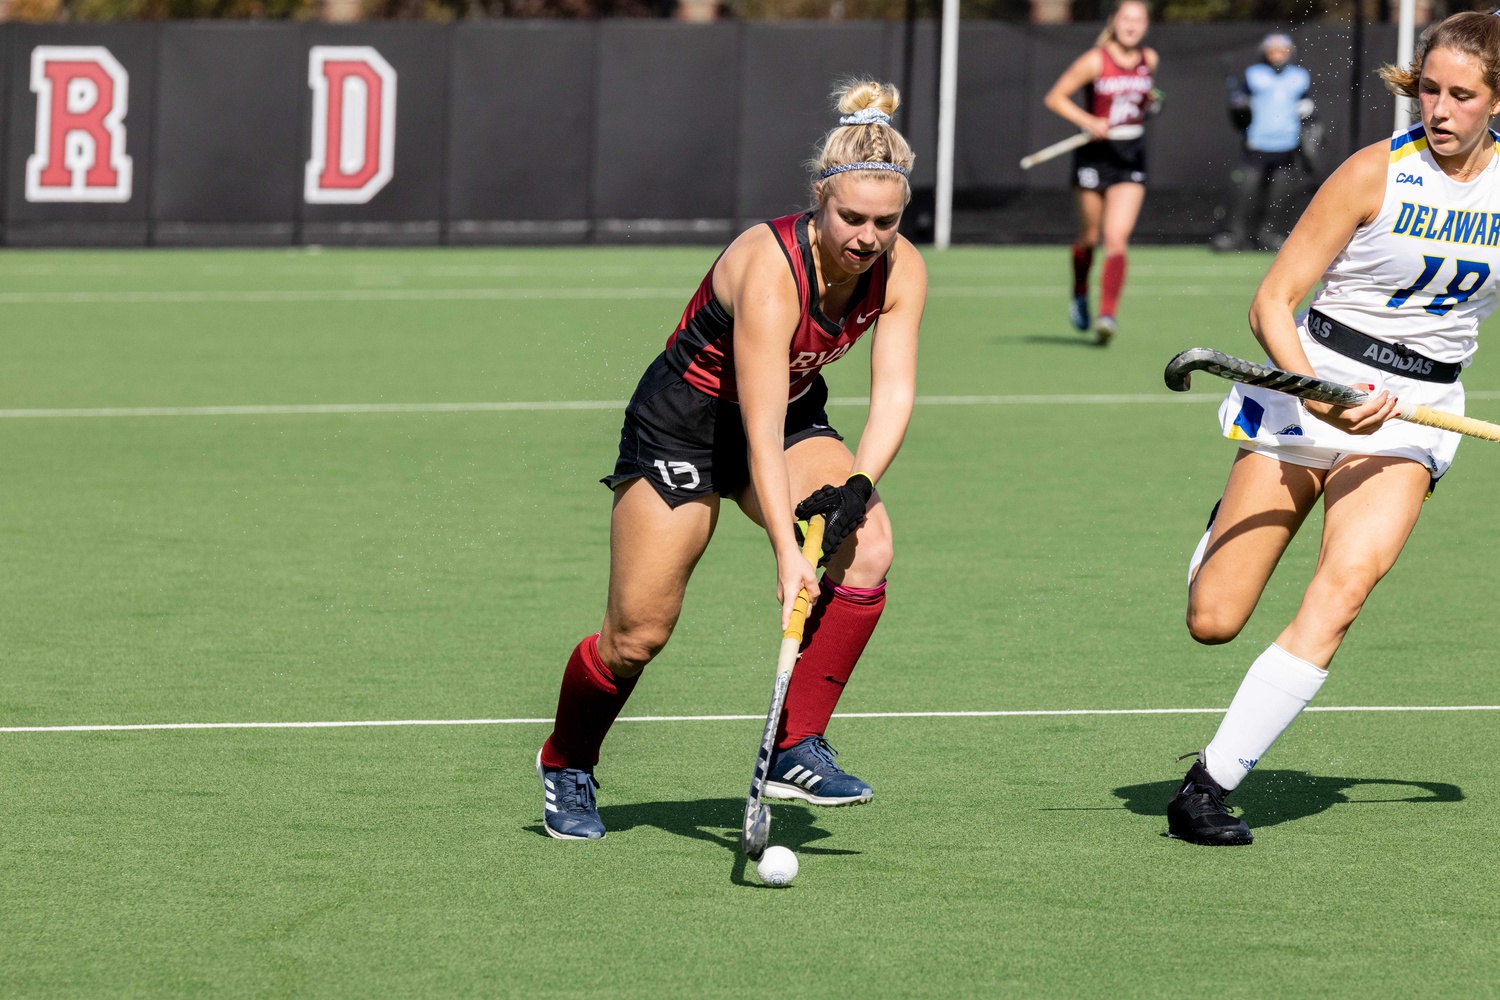 Then-sophomore midfielder Siena Horton moves the ball up the field against Delaware on October 16, 2022.